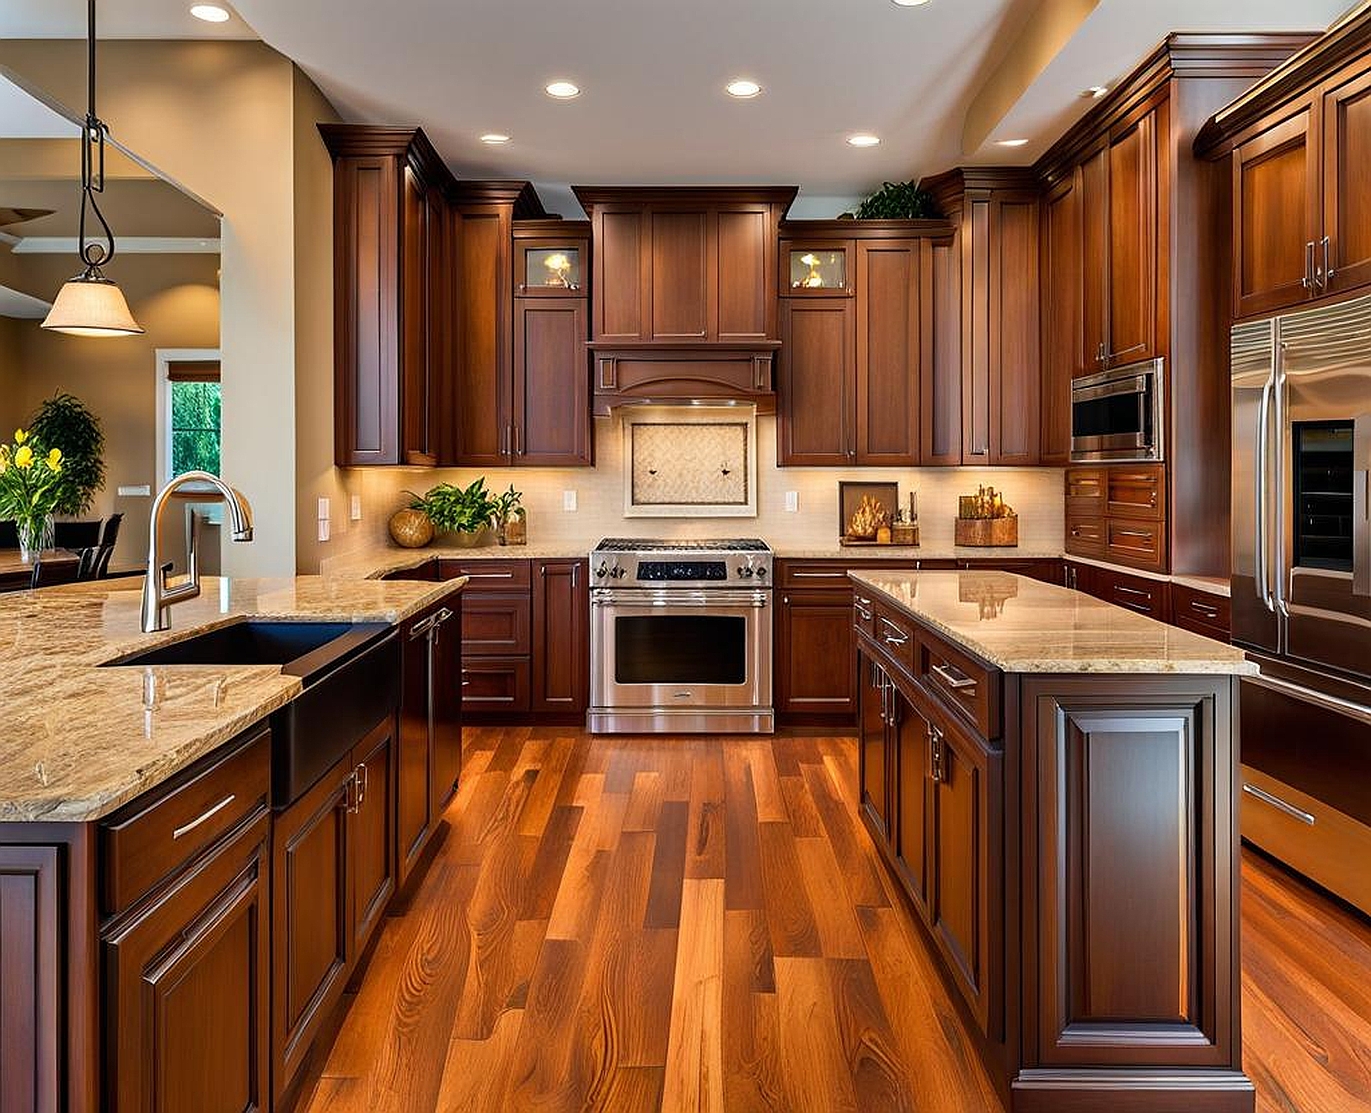 The Importance of Selecting the Most Durable Wood for Kitchen Cabinets